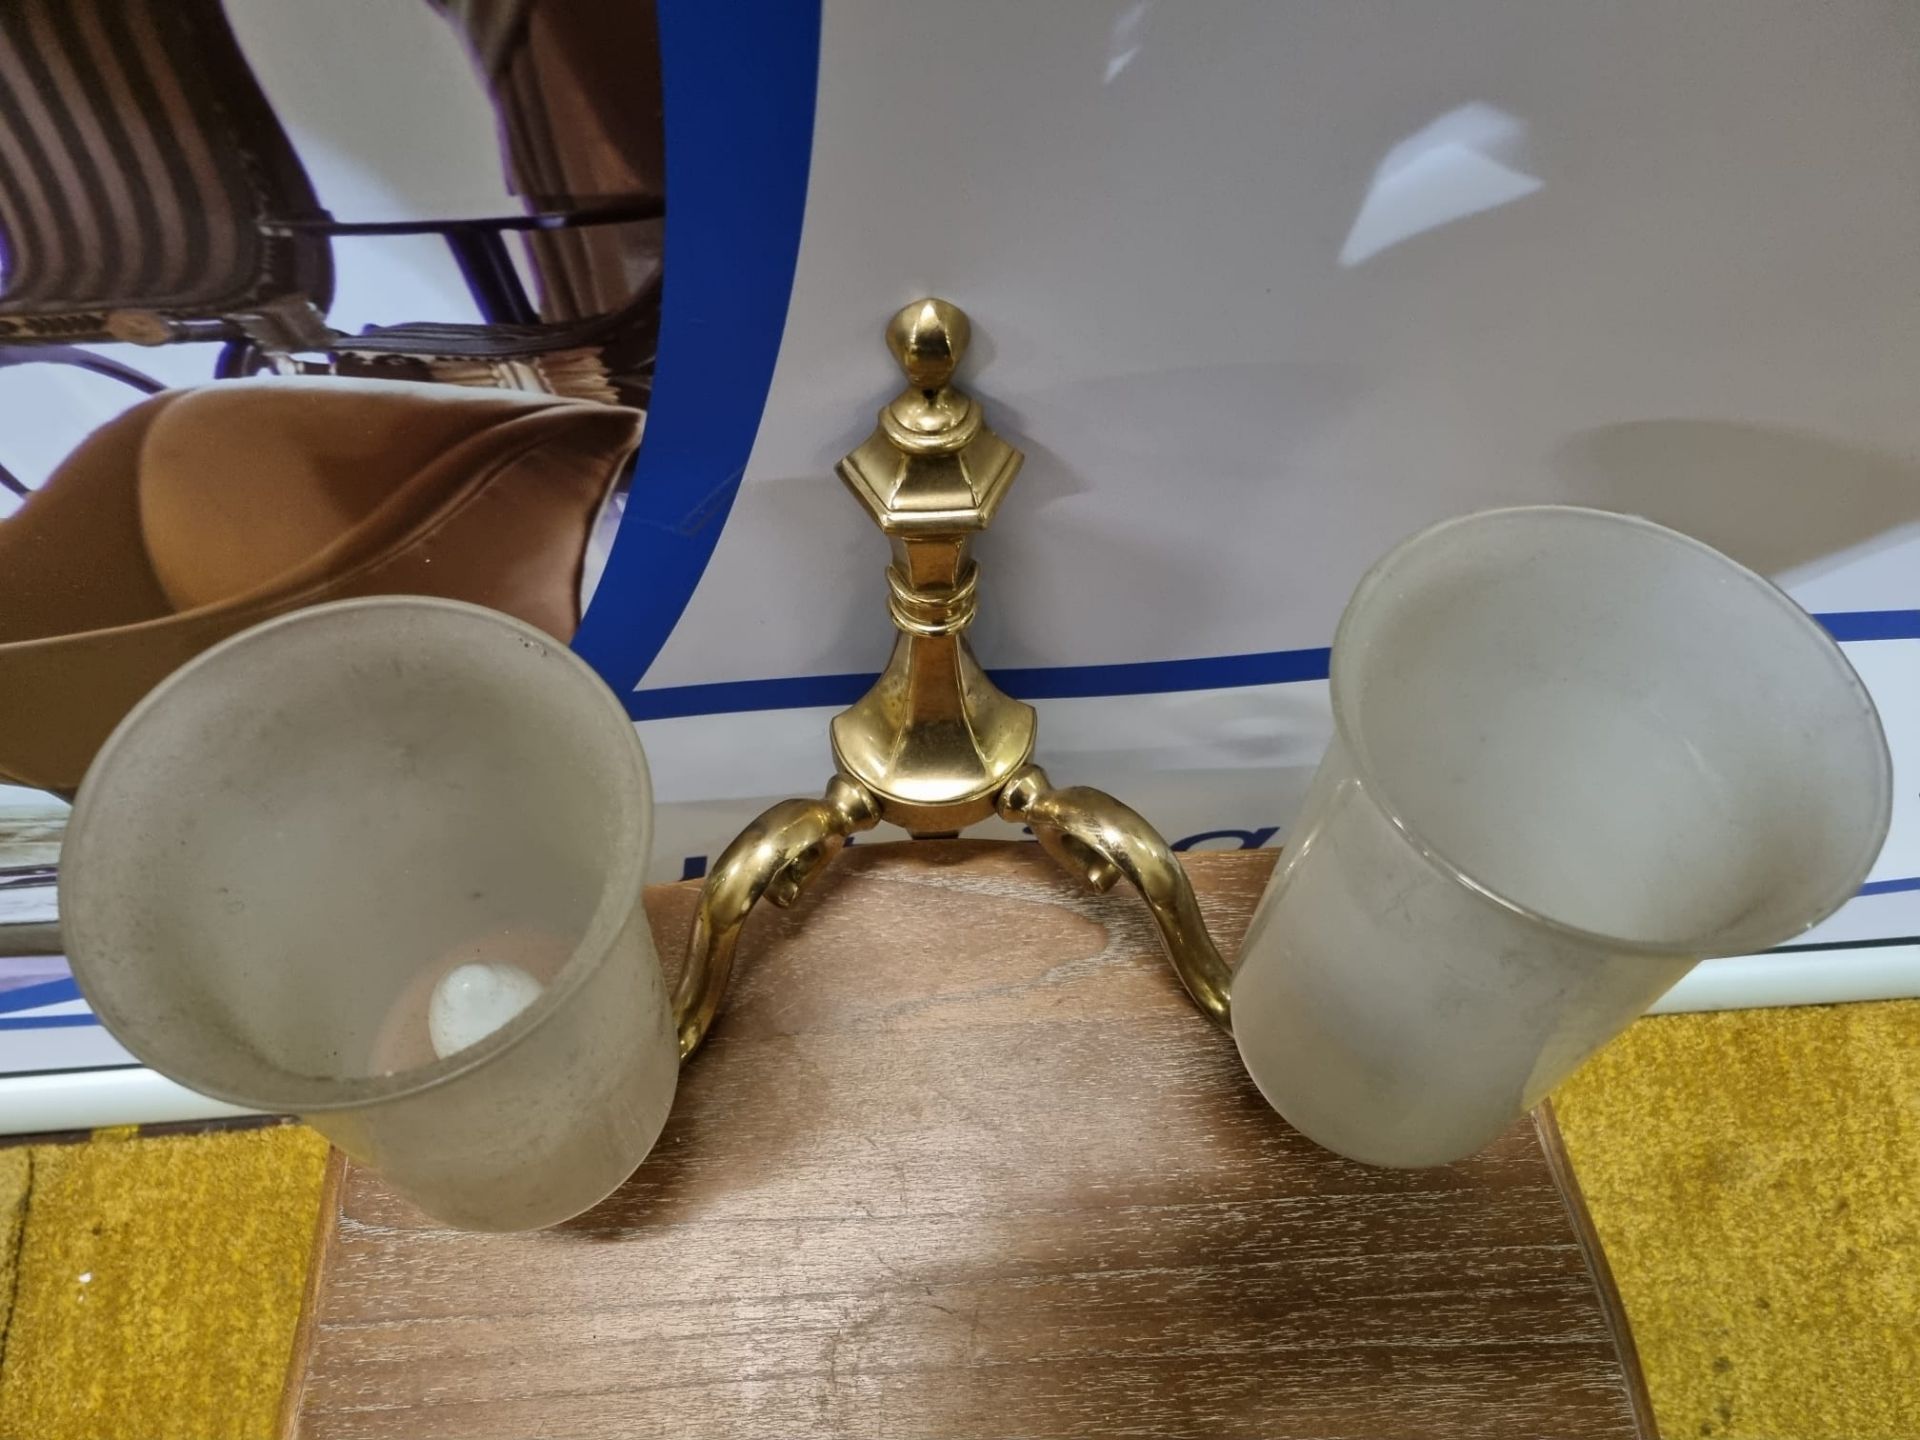 A Polished Brass Twin Arm Candle Wall Sconce With Glass Shades 30cm High - Bild 2 aus 3